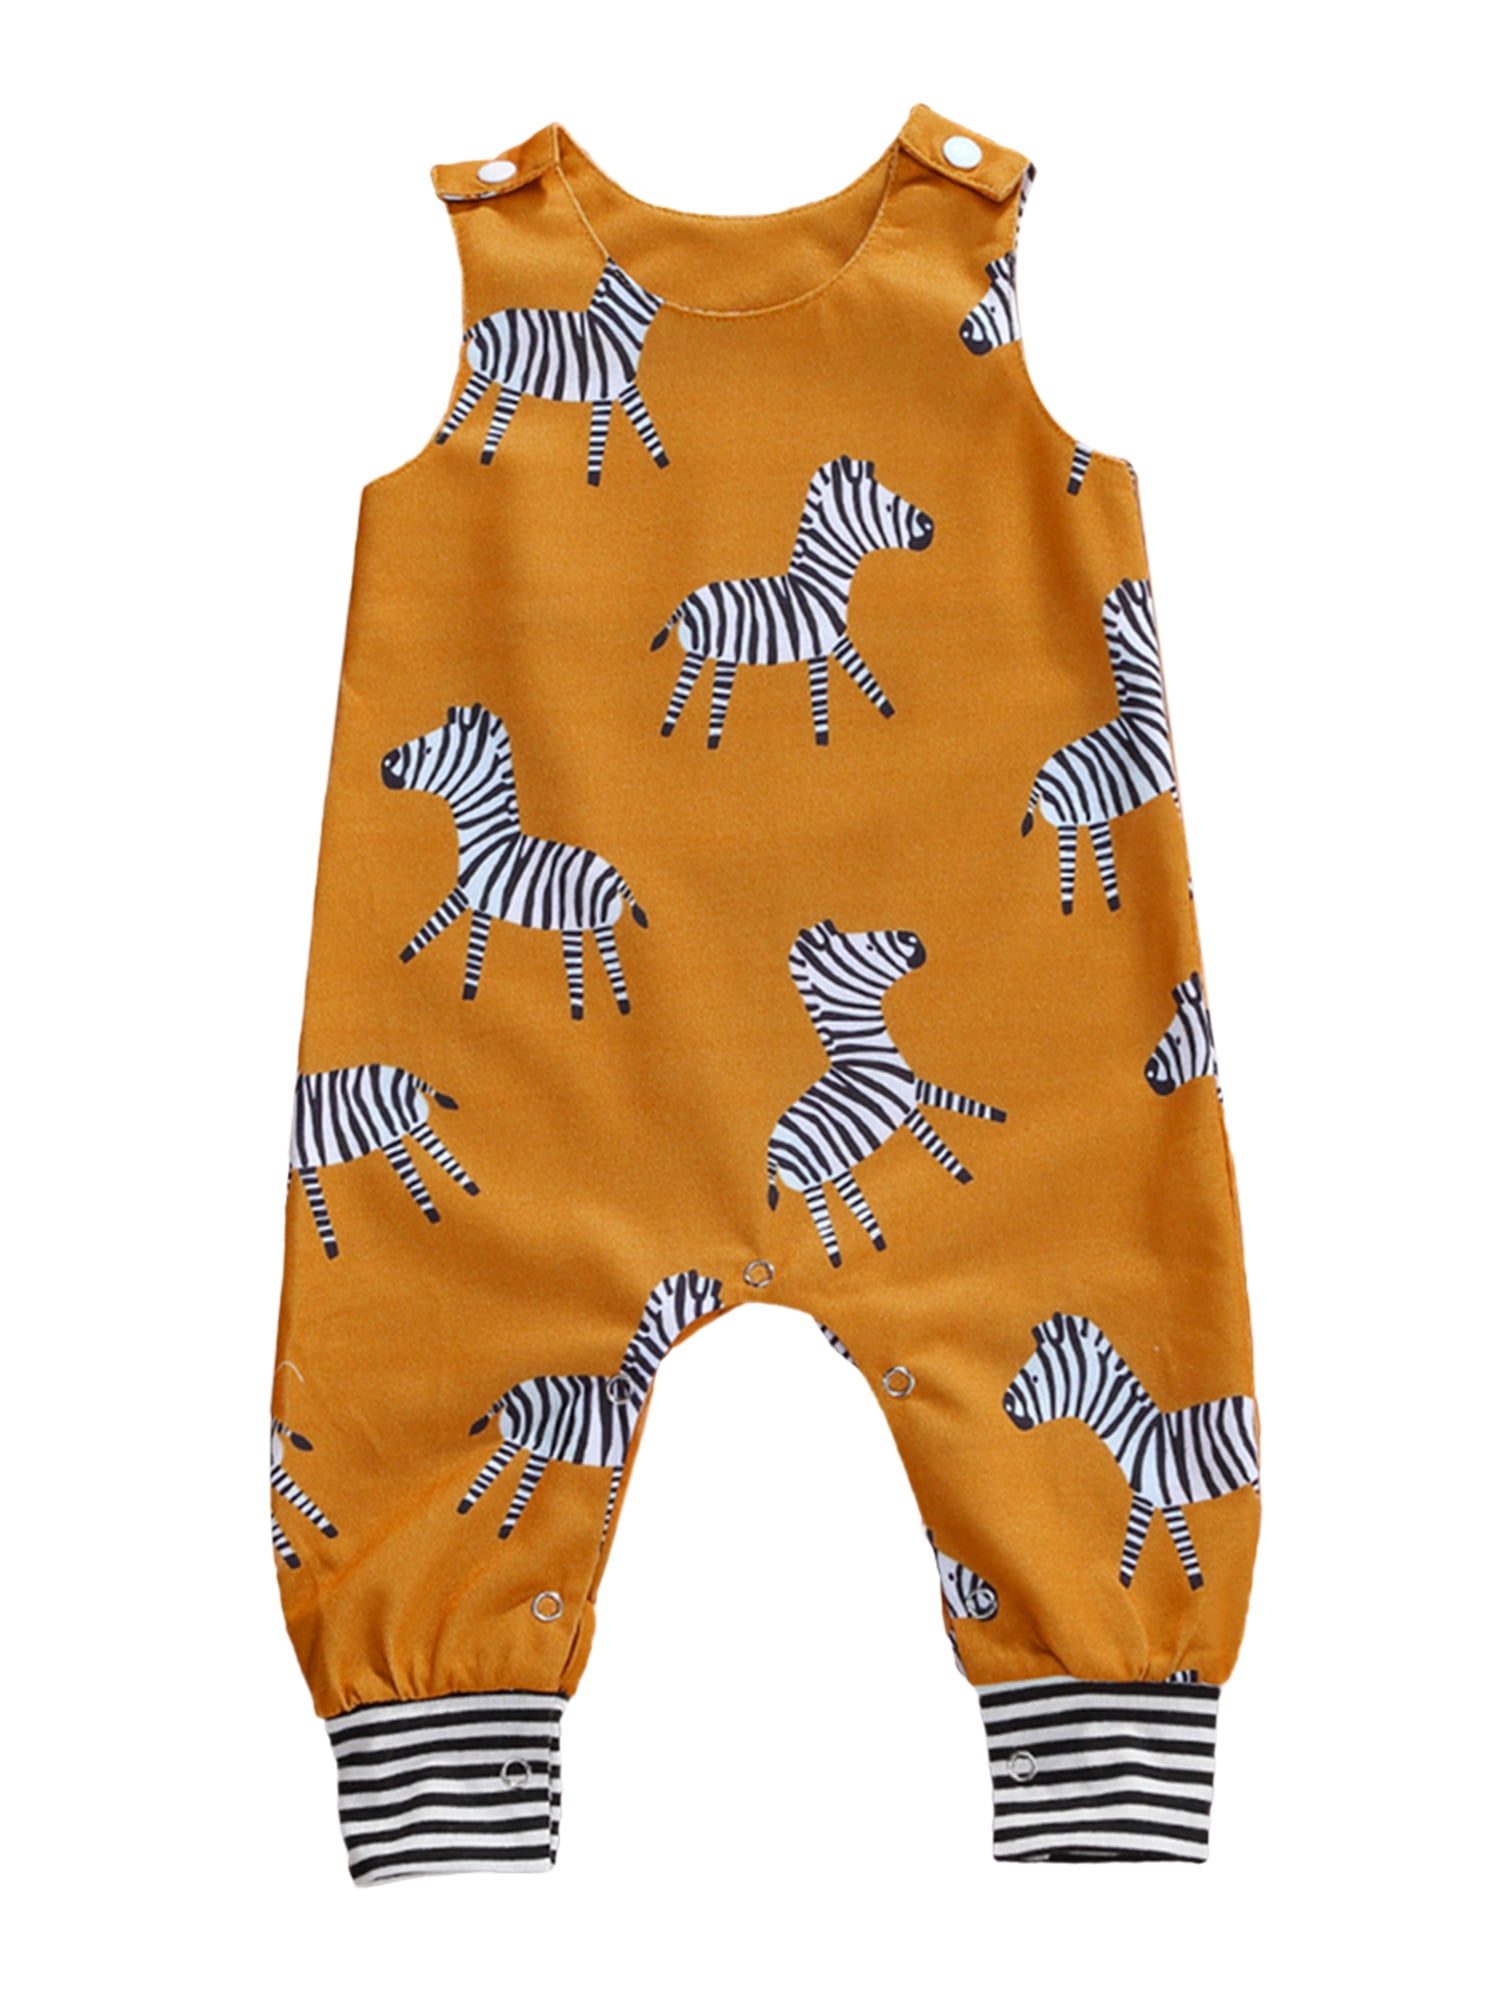 Zebra Feed Me Summer Baby Sleeveless Romper One-Piece Bodysuit Jumpsuit Outfits